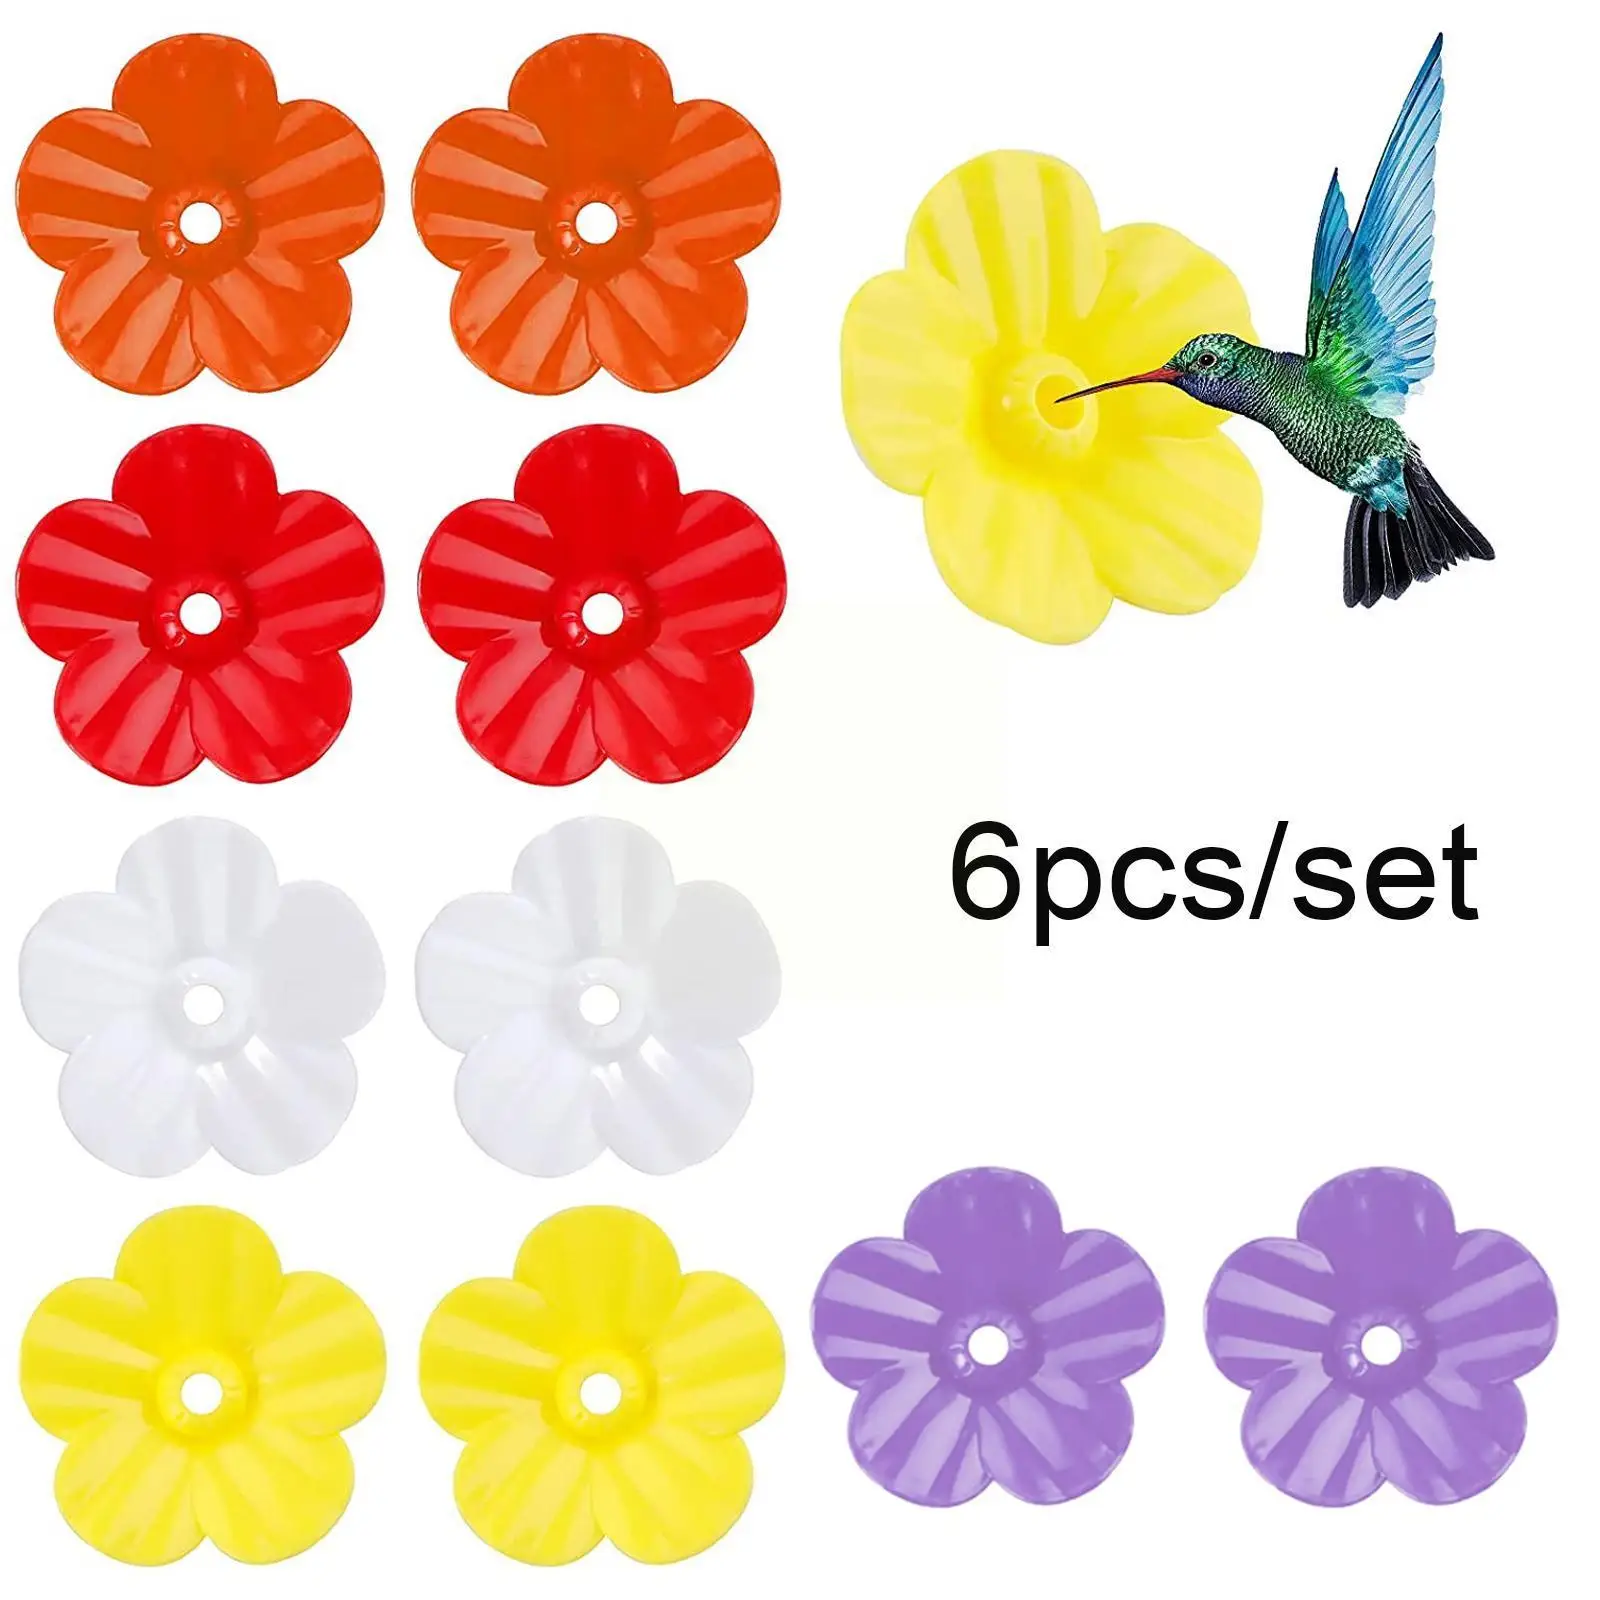 Flowers Outdoor Plastic Feeding Ports Replacement Parts For Feeder Hanging Use Supply H3k2